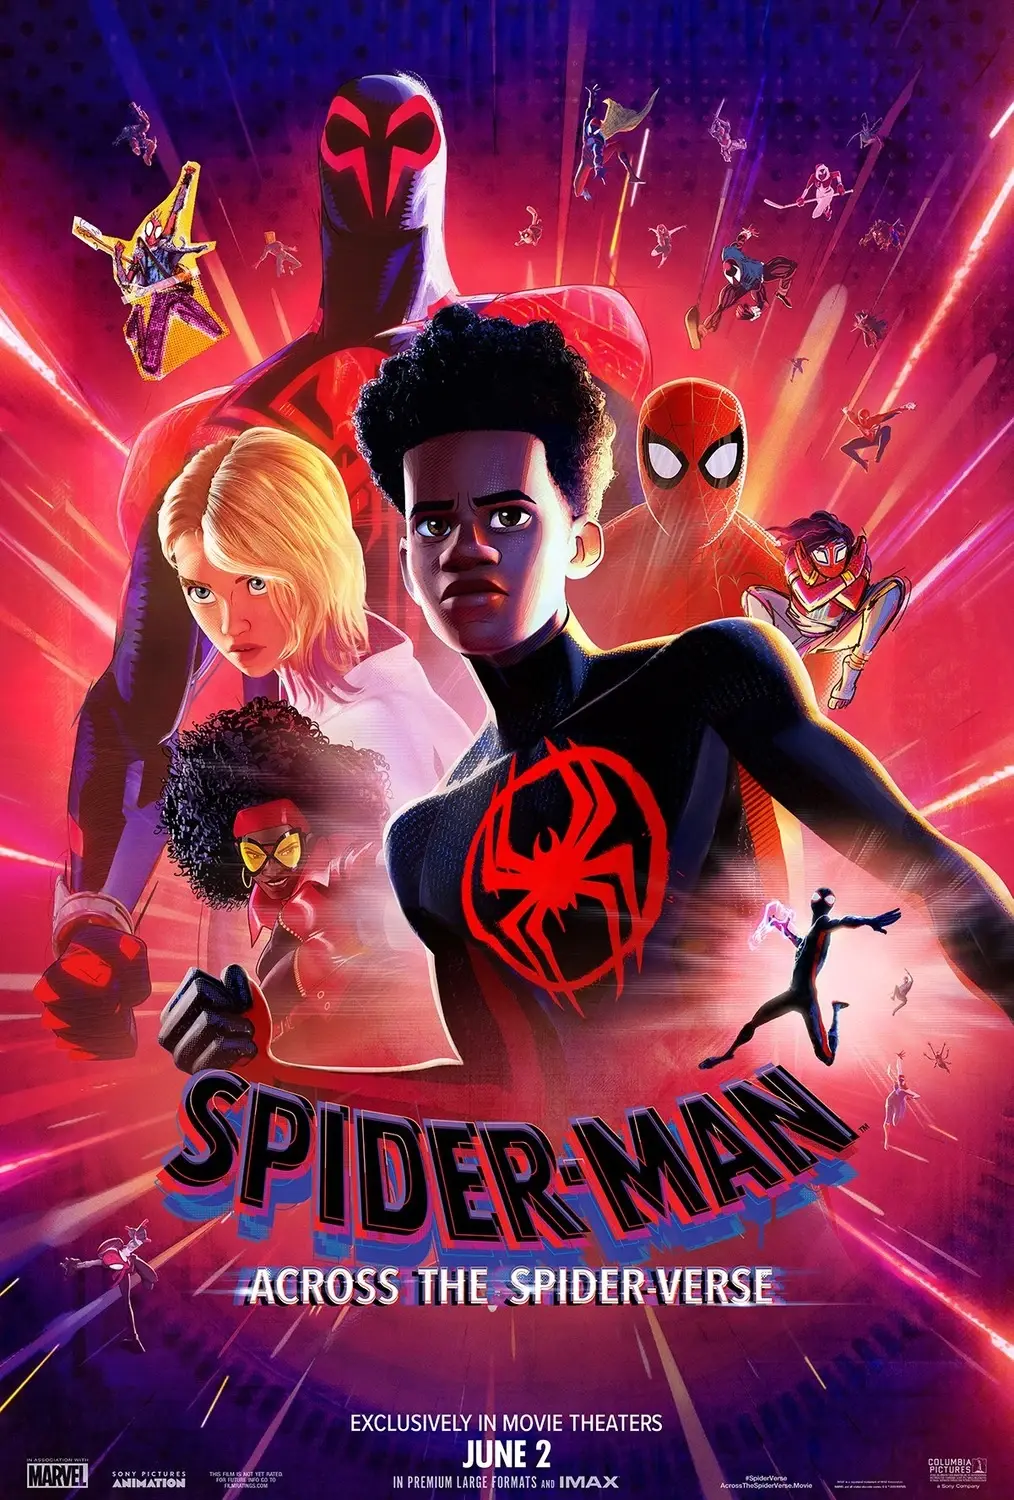 Spider-Man%3A+Across+the+Spider-Verse+sets+an+unreachable+bar+for+sequels